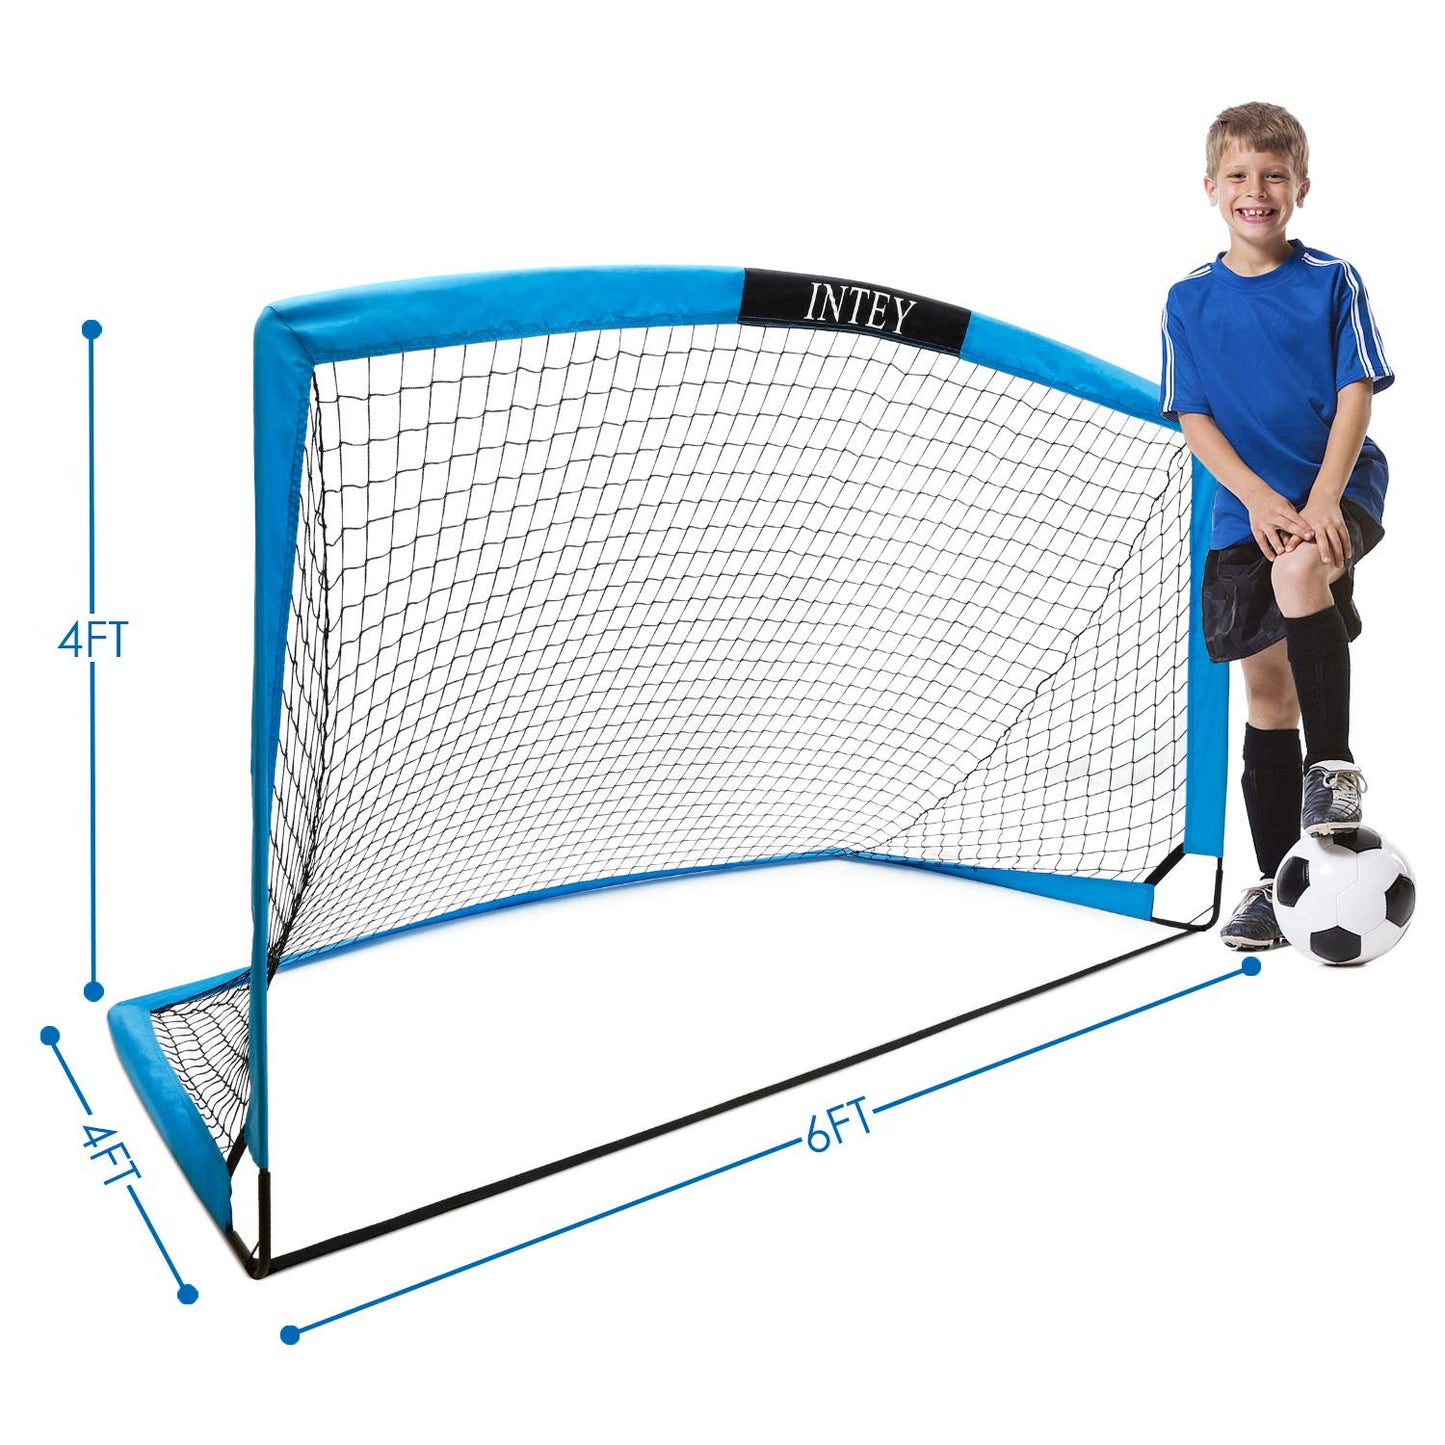 intey Soccer Goal 6 Ft. 6' In. x 3 Ft. 3 In. Portable Soccer Net with Carry Bag for Games and Training for Kids and Teens